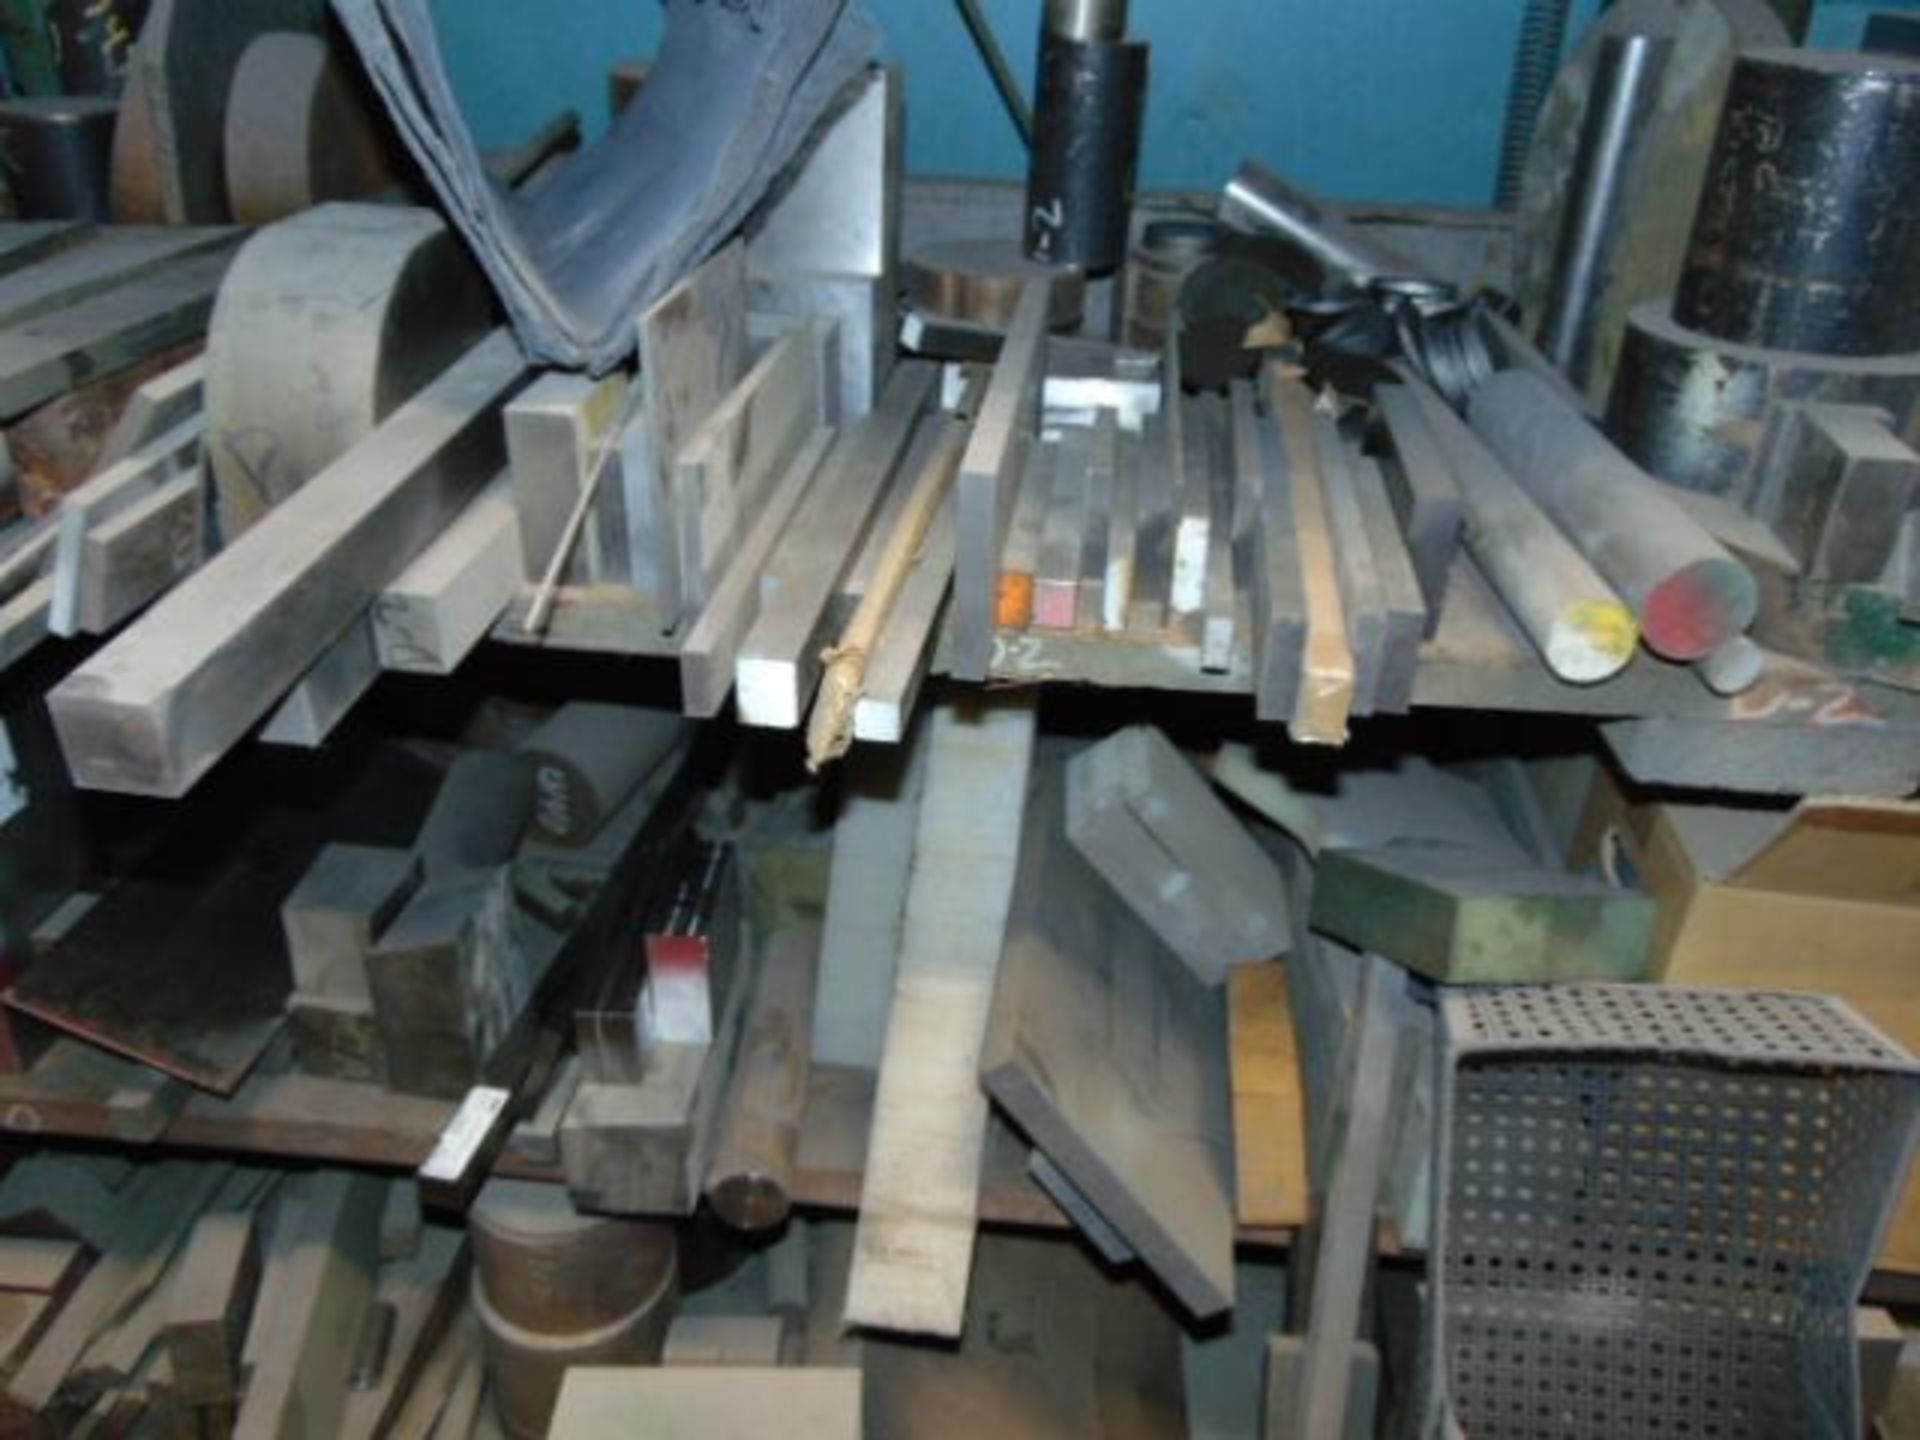 LOT CONSISTING OF TOOL STEEL: 4140, HRS, F7, D2, M2, M4, A2, VAN; large assortment, in sorted rack, - Image 7 of 13